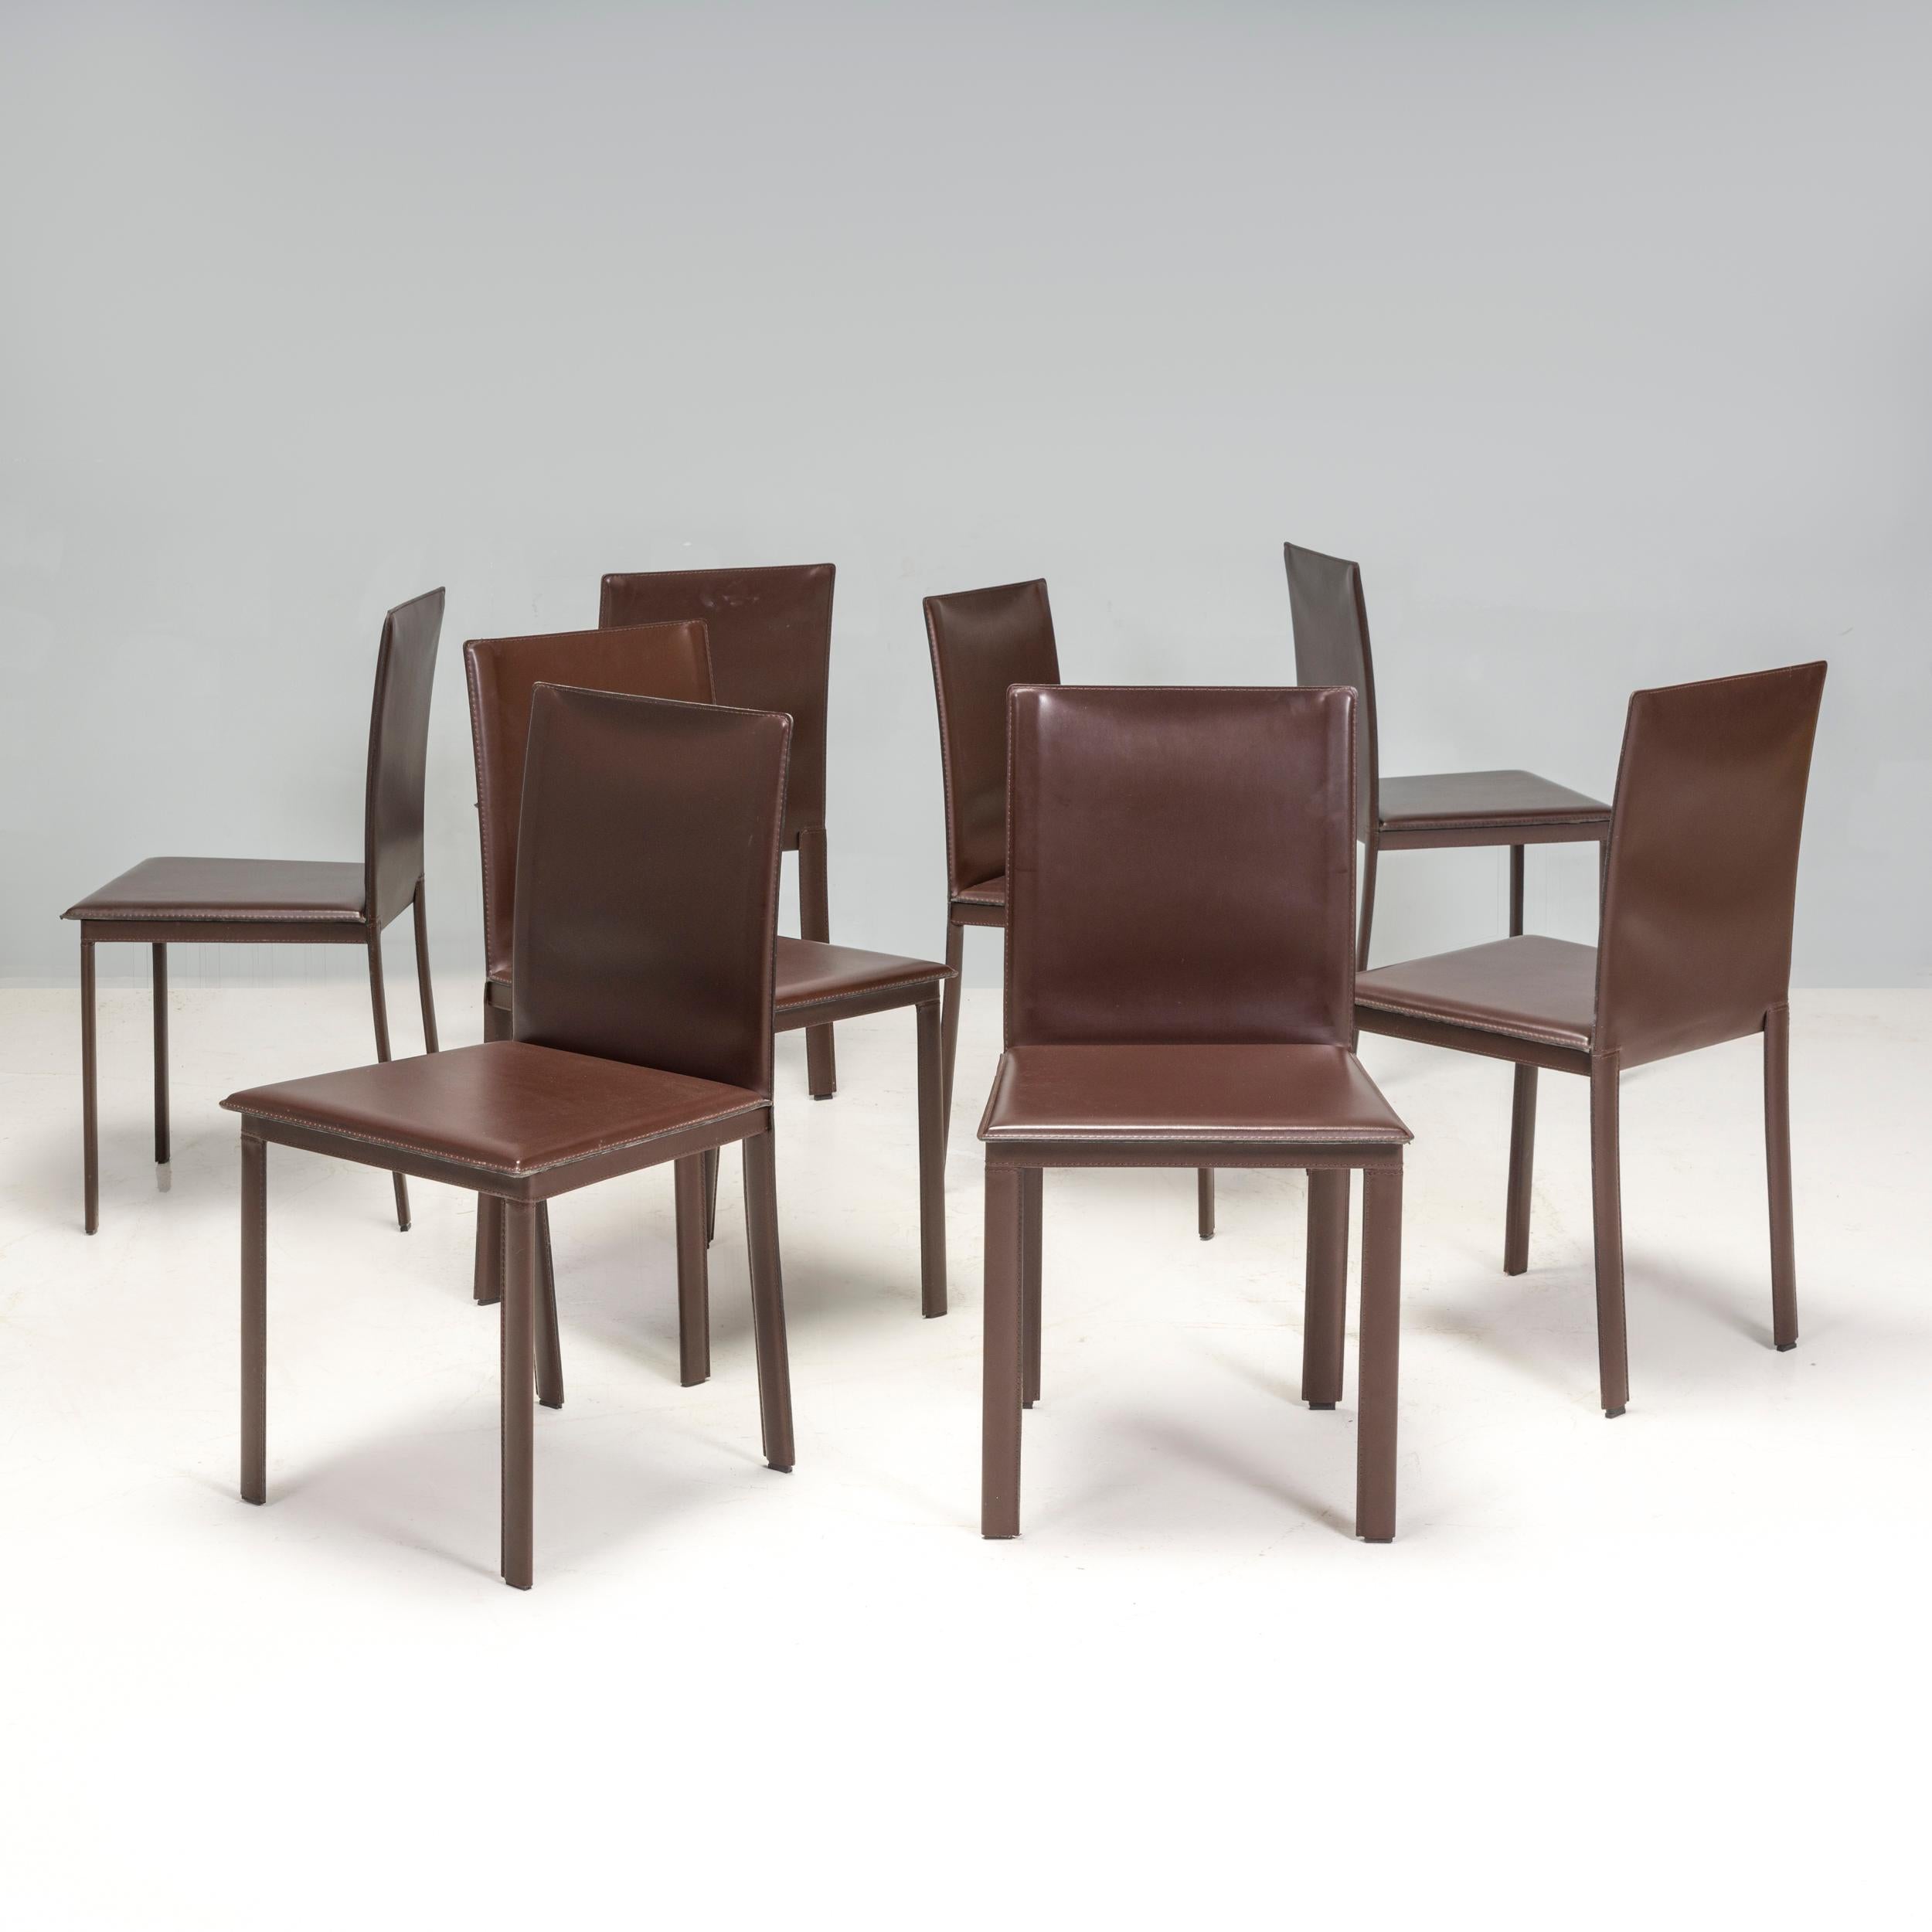 The Riva 1920 Dining Chairs sleek, contemporary silhouette. Their seat cushions are padded and upholstered in deep brown leather for additional comfort, and have a glossy finish that adds to their sophisticated style. Meanwhile details such as the